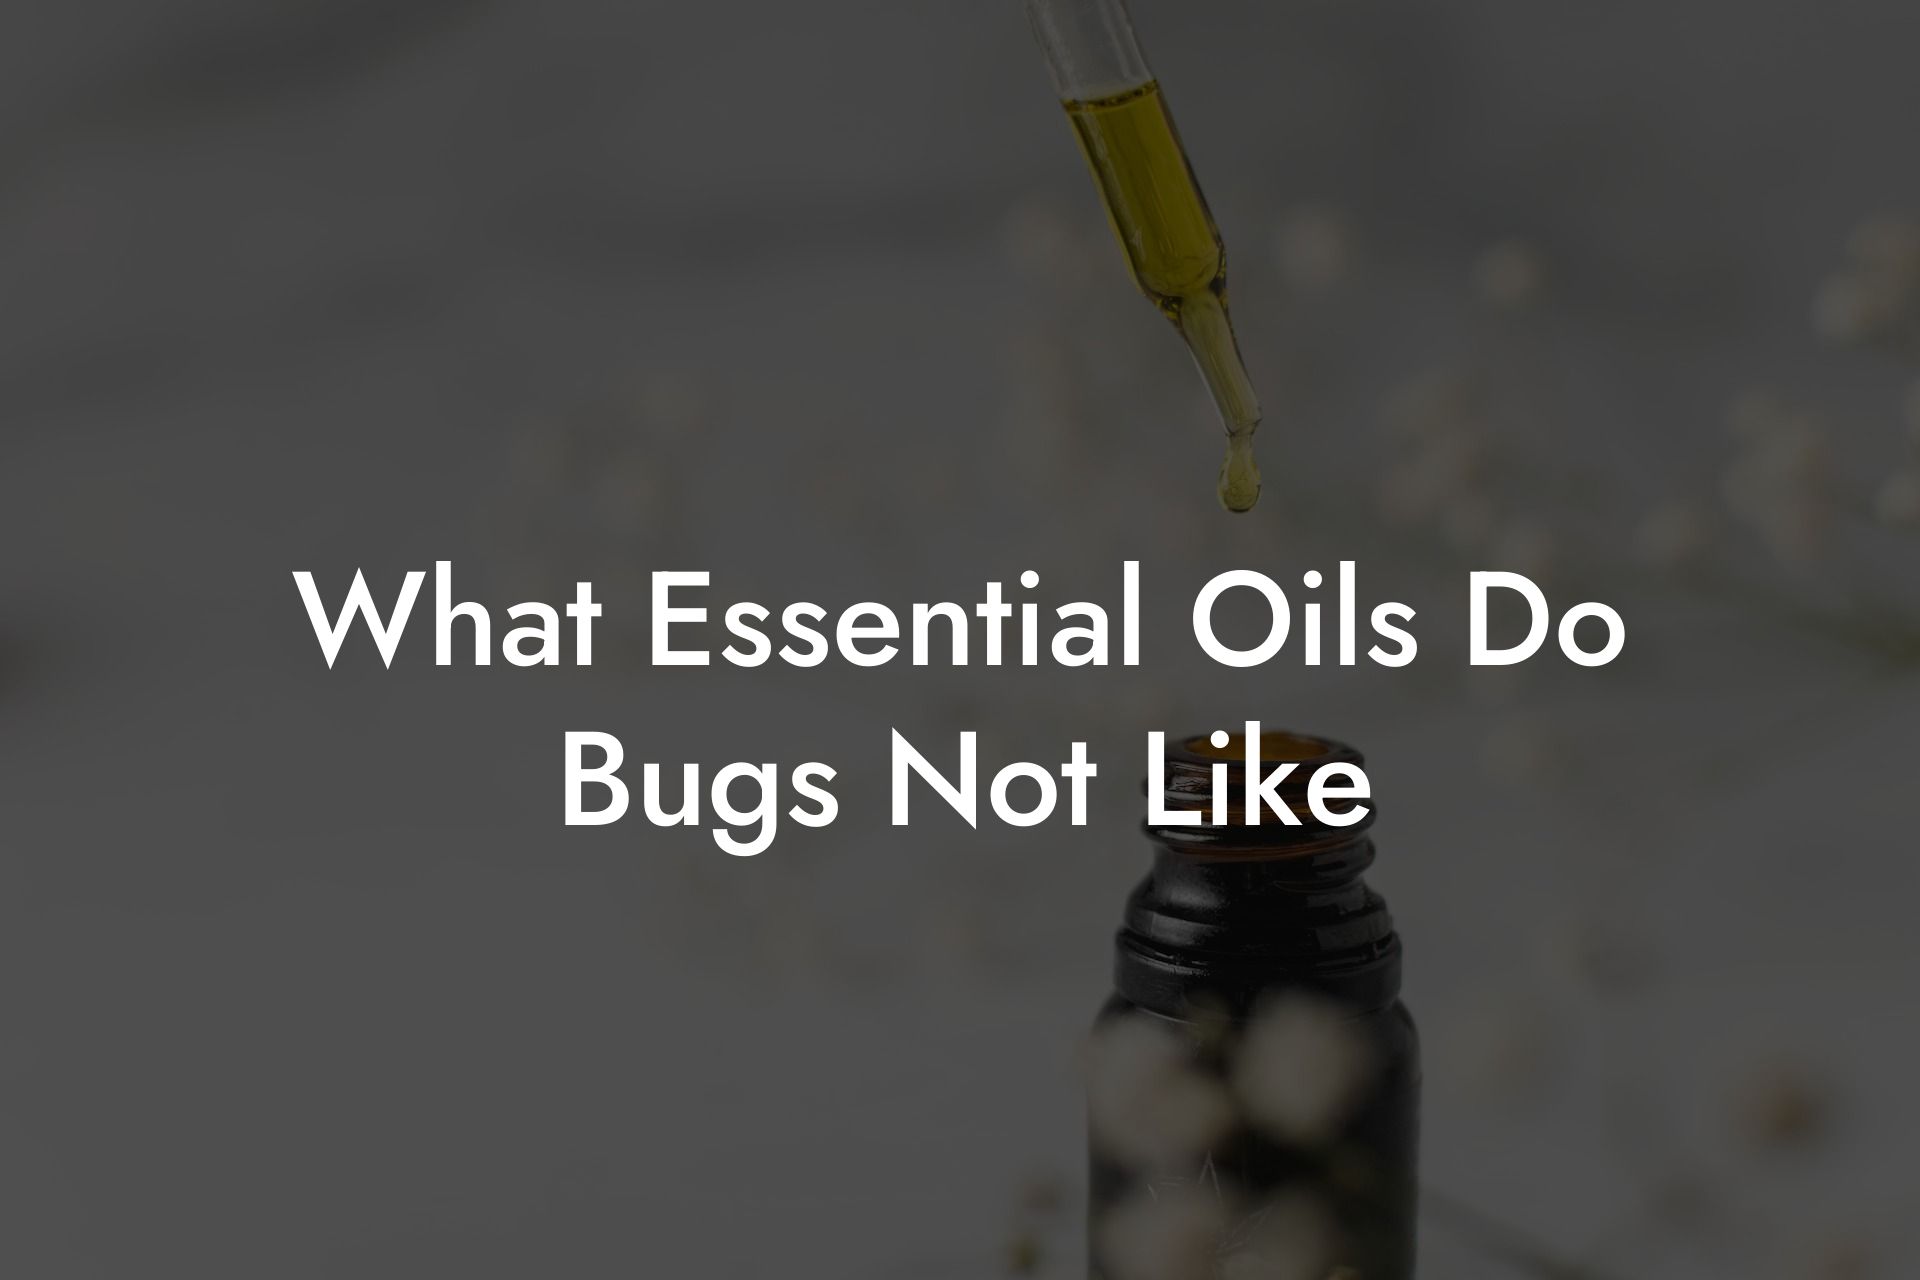 What Essential Oils Do Bugs Not Like